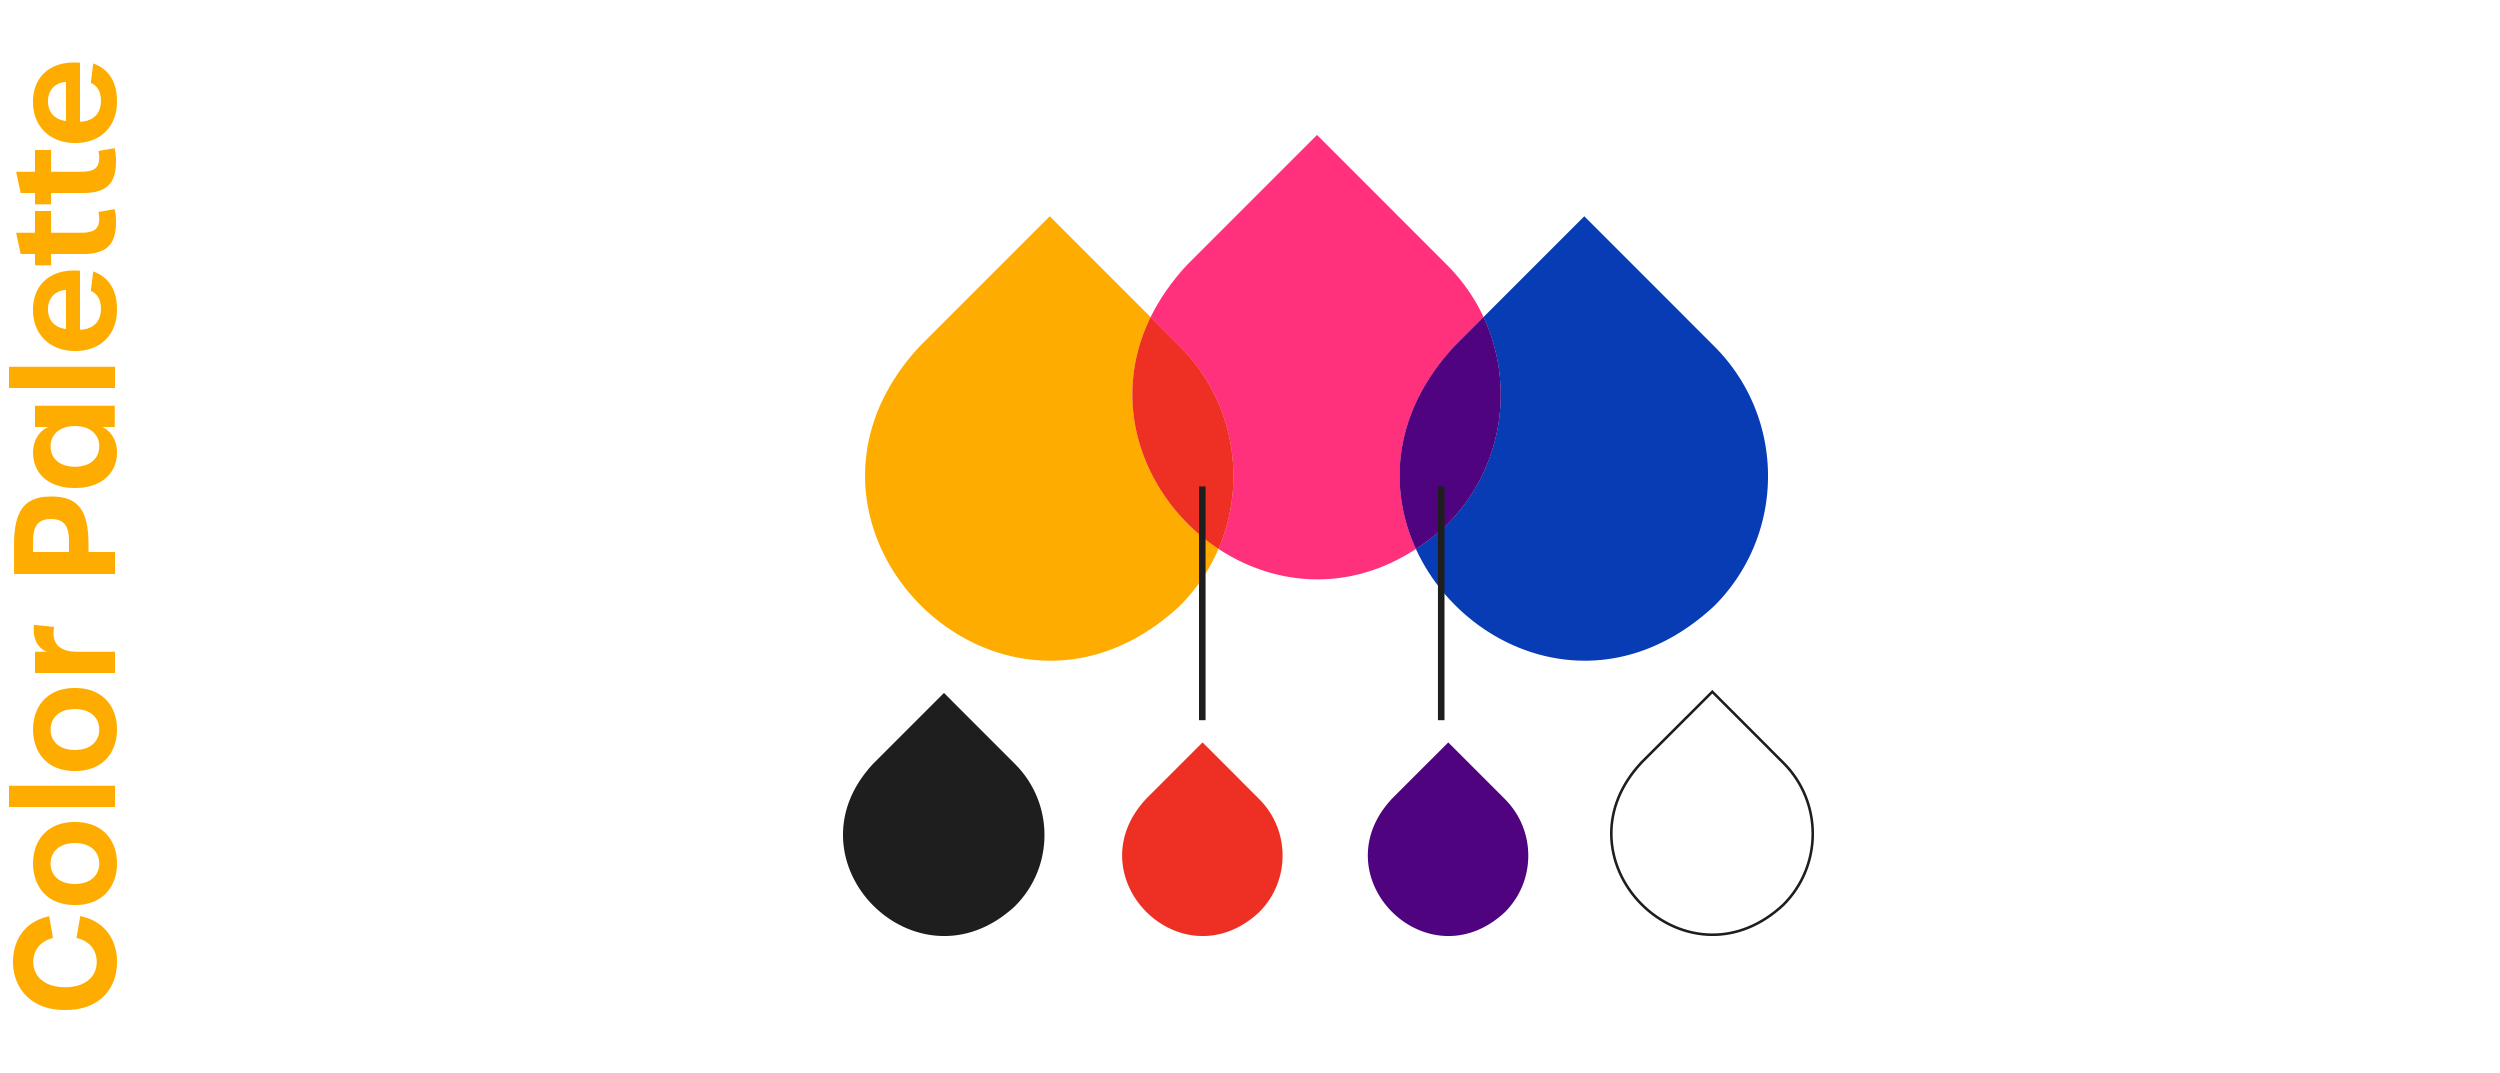 Ink drops in various colors with description, titled 